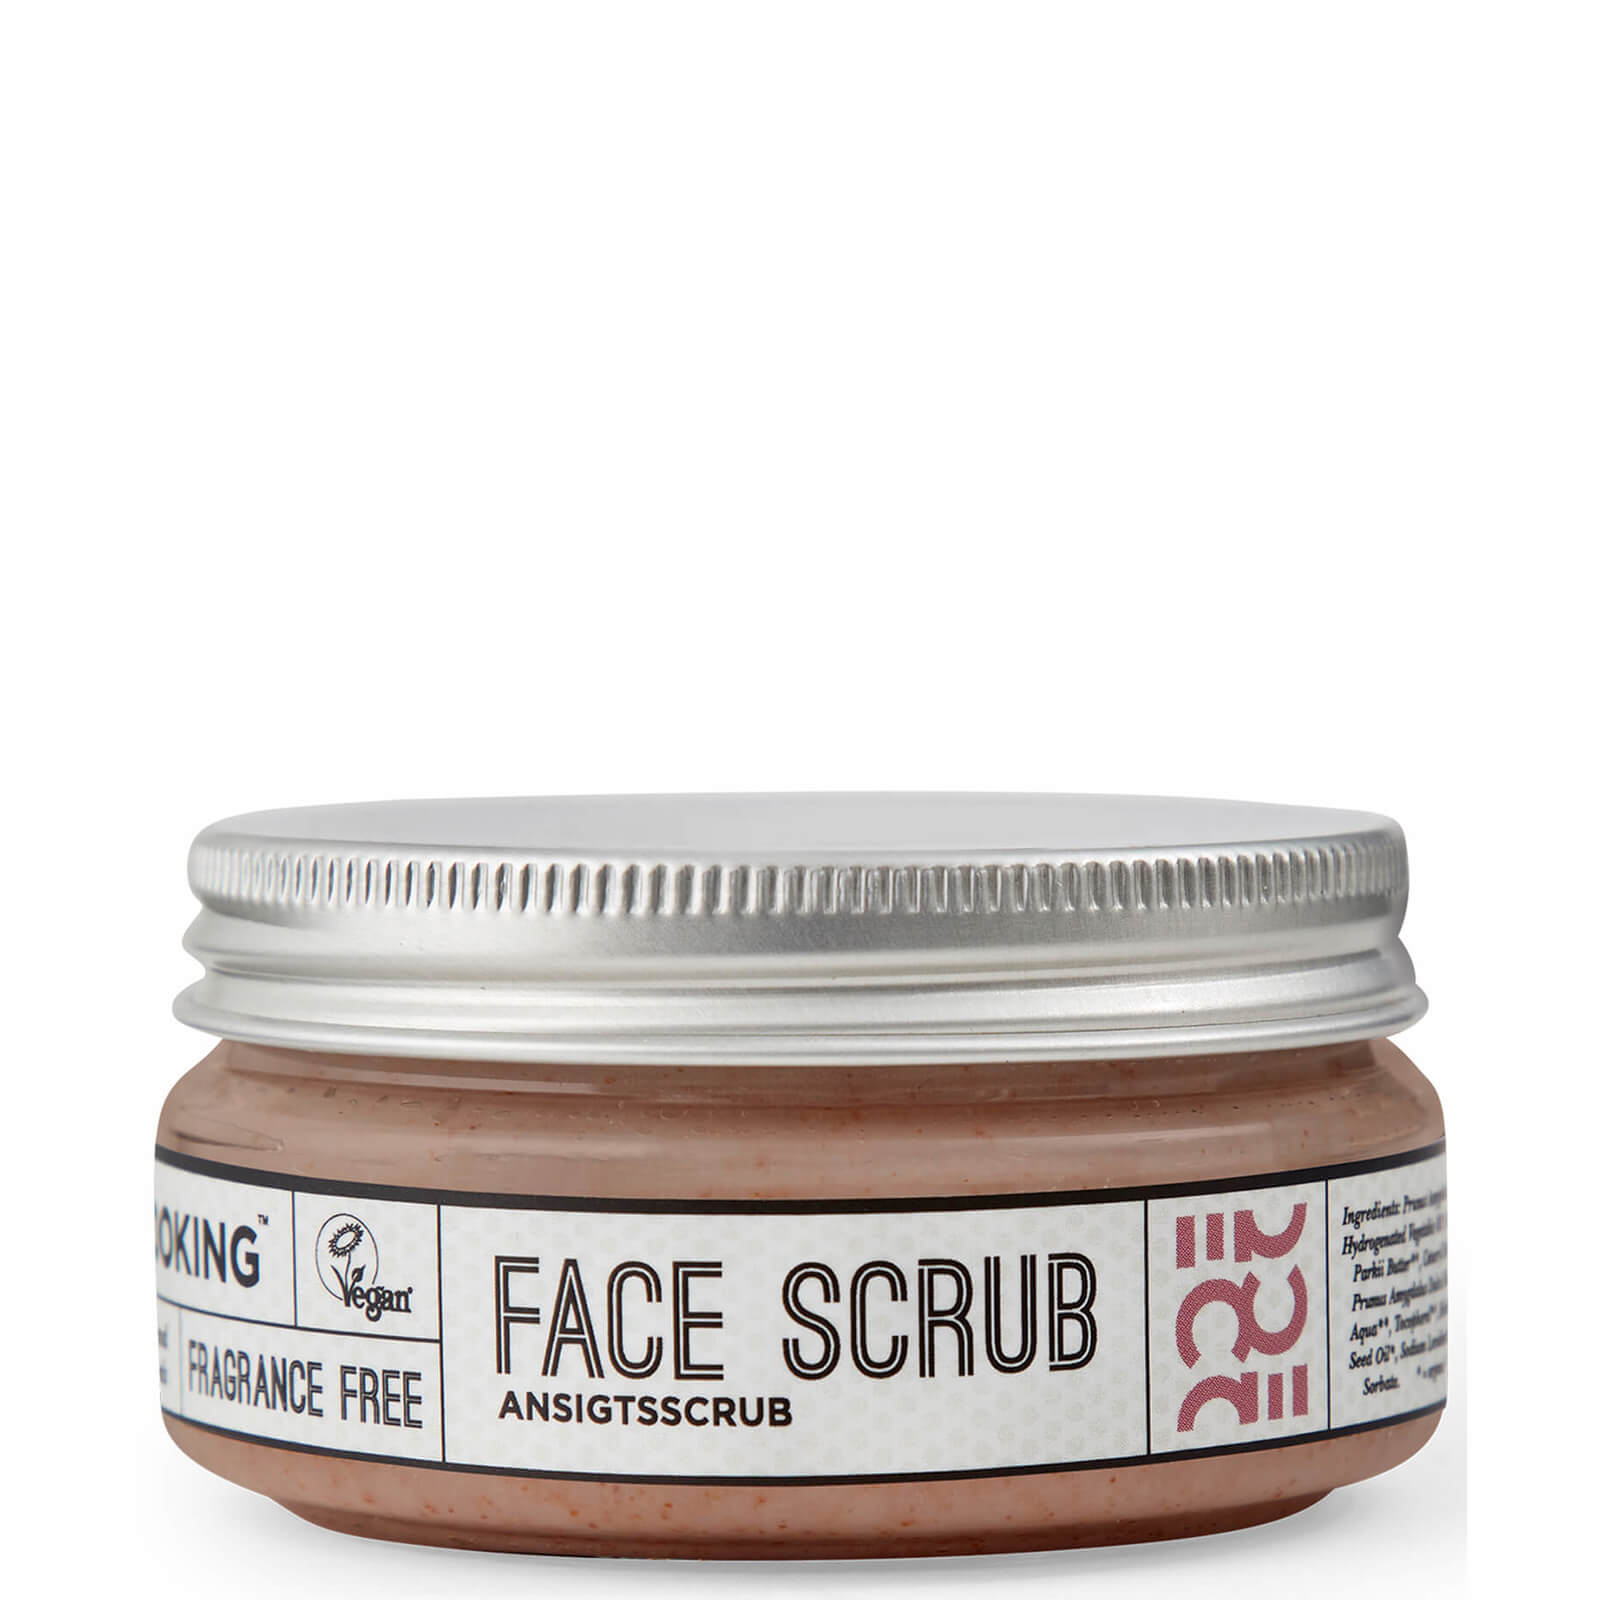 Photos - Facial / Body Cleansing Product Ecooking Face Scrub 100ml 61034